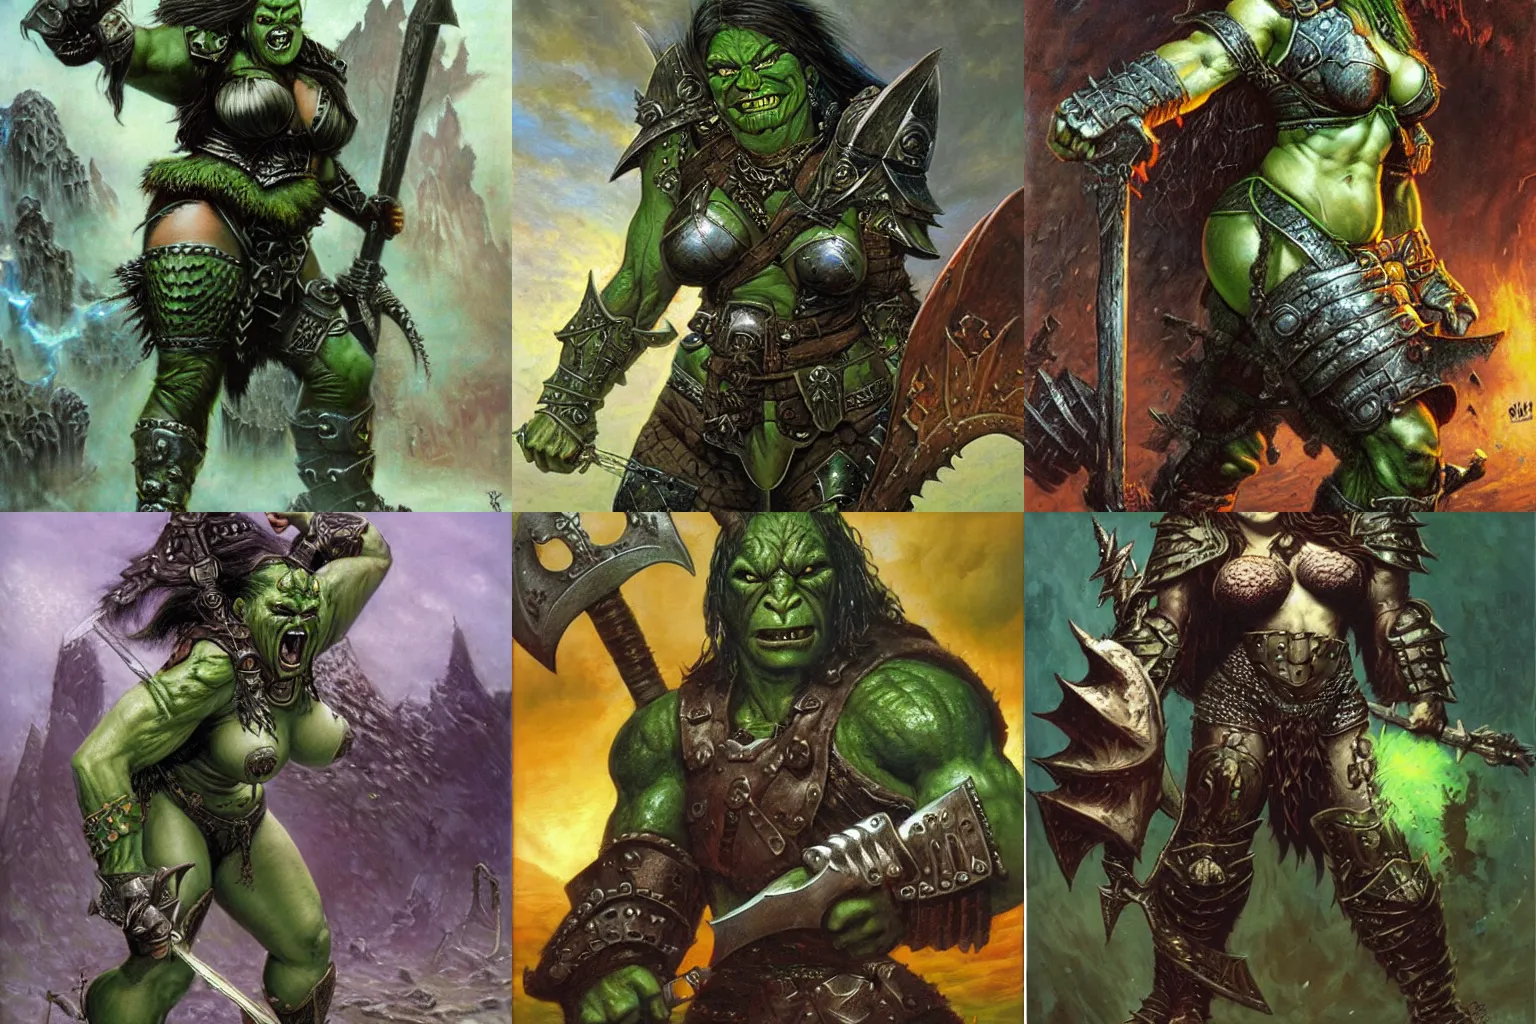 Prompt: A big green orc lady barbarian with heavy-plate-armor. Fierce fantasy artwork by Greg staples and Kev Walker, oil painting on matte canvas